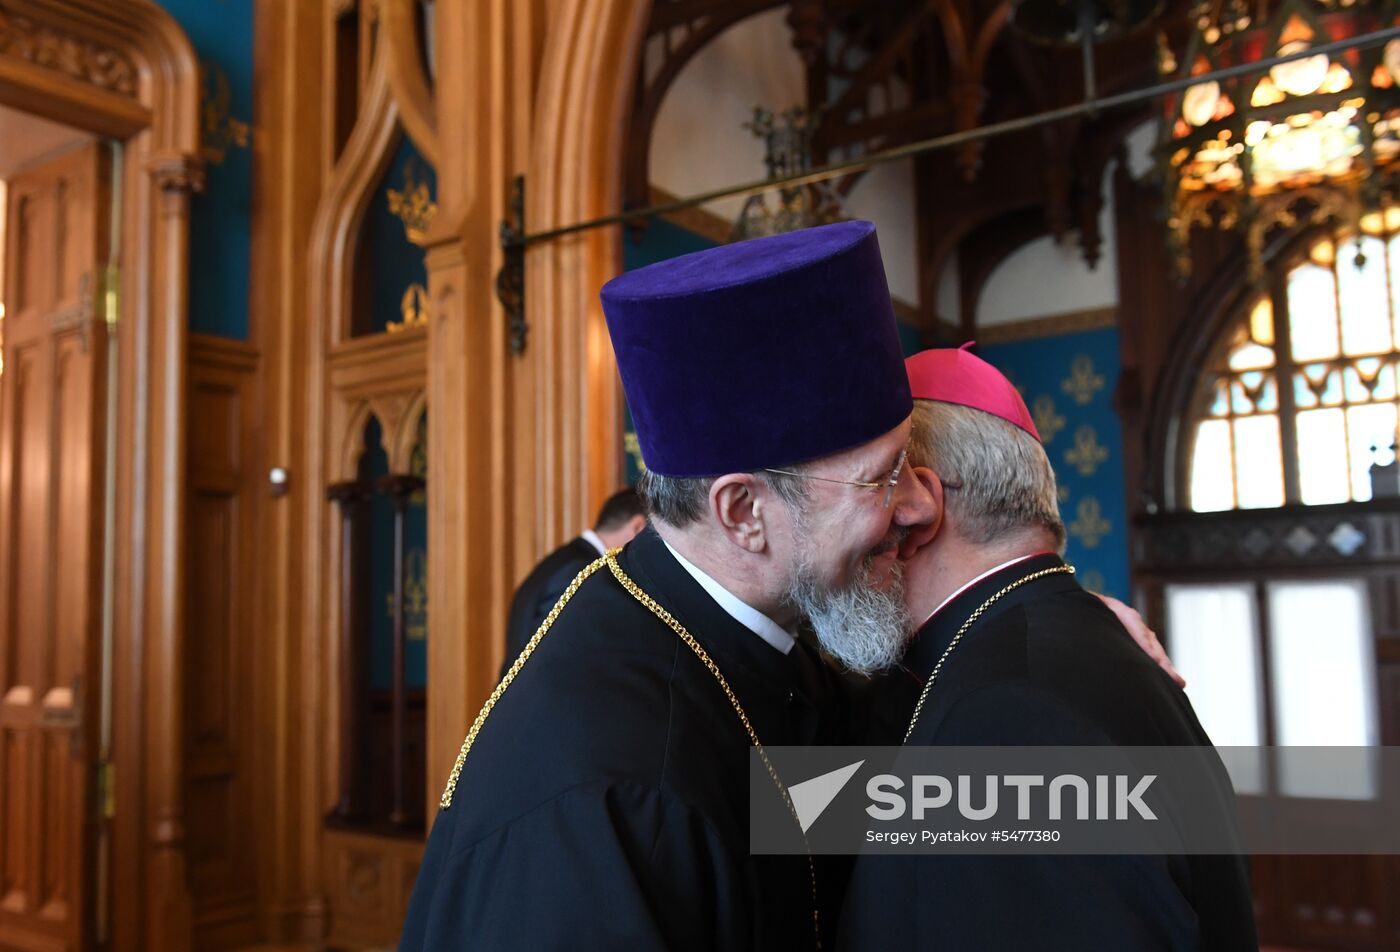 Reception on behalf of Russian Foreign Minister to mark Orthodox Easter